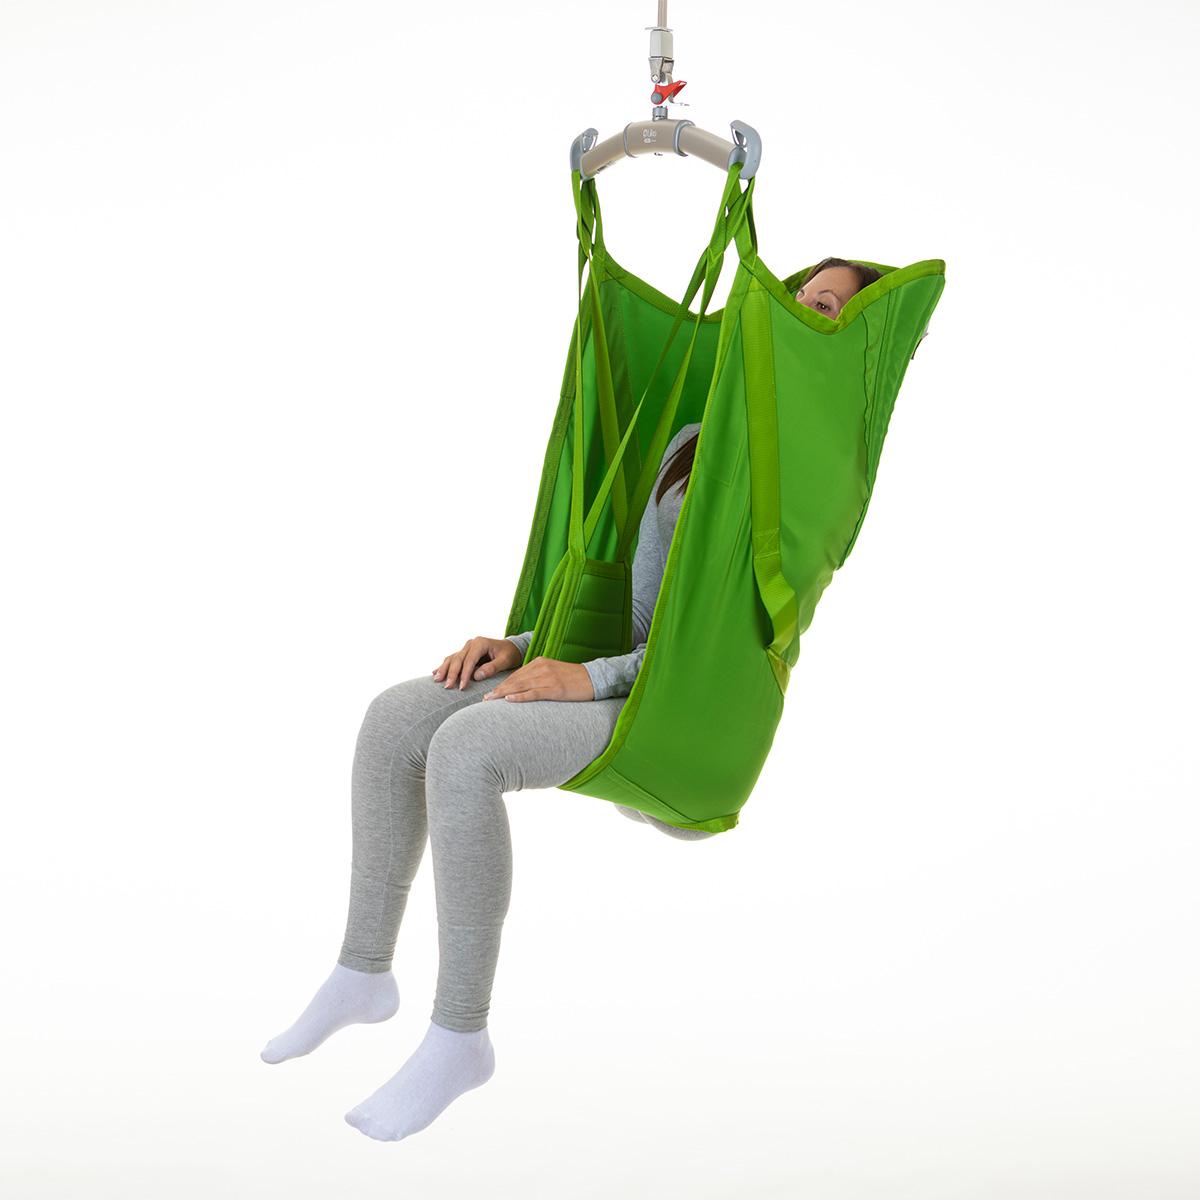 A patient sits in a soft Hillrom highback sling